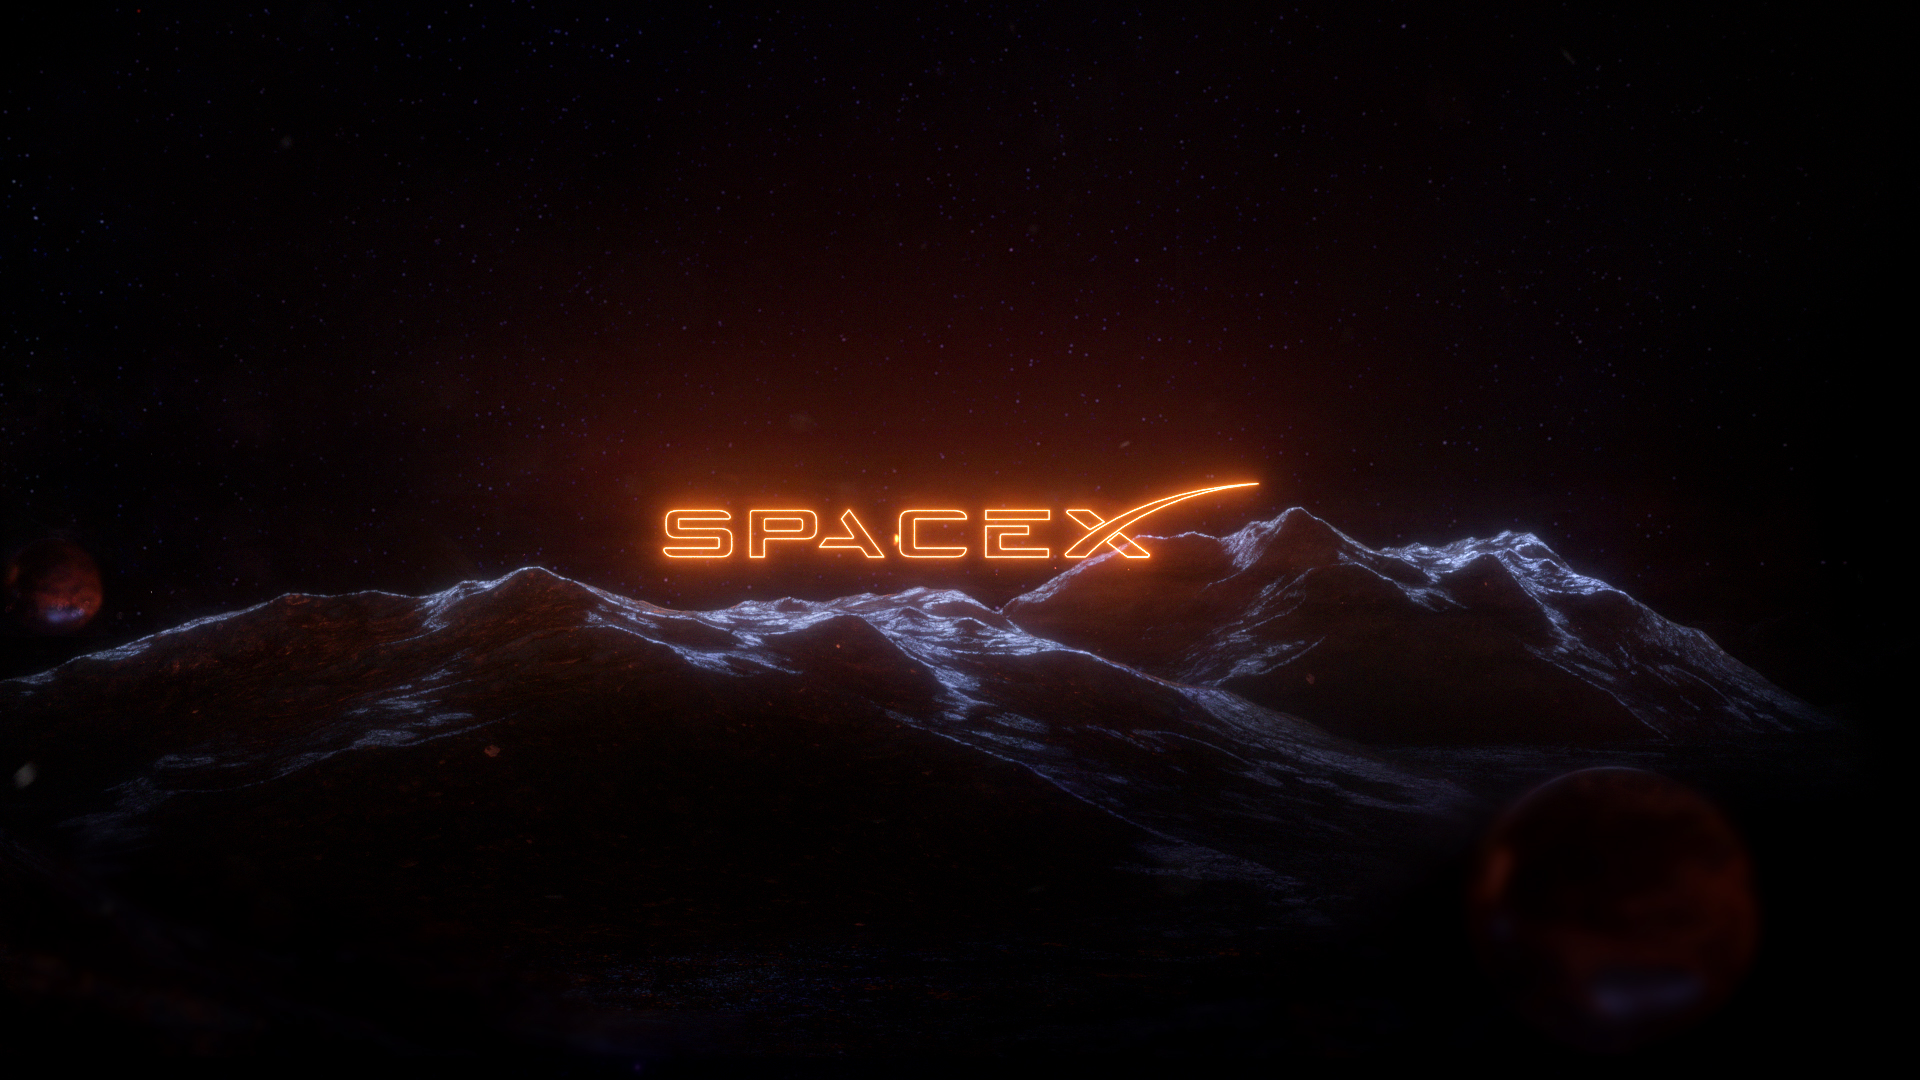 SPACEX LOGO REVEAL - Jehee Lee_Motion Graphic Designer